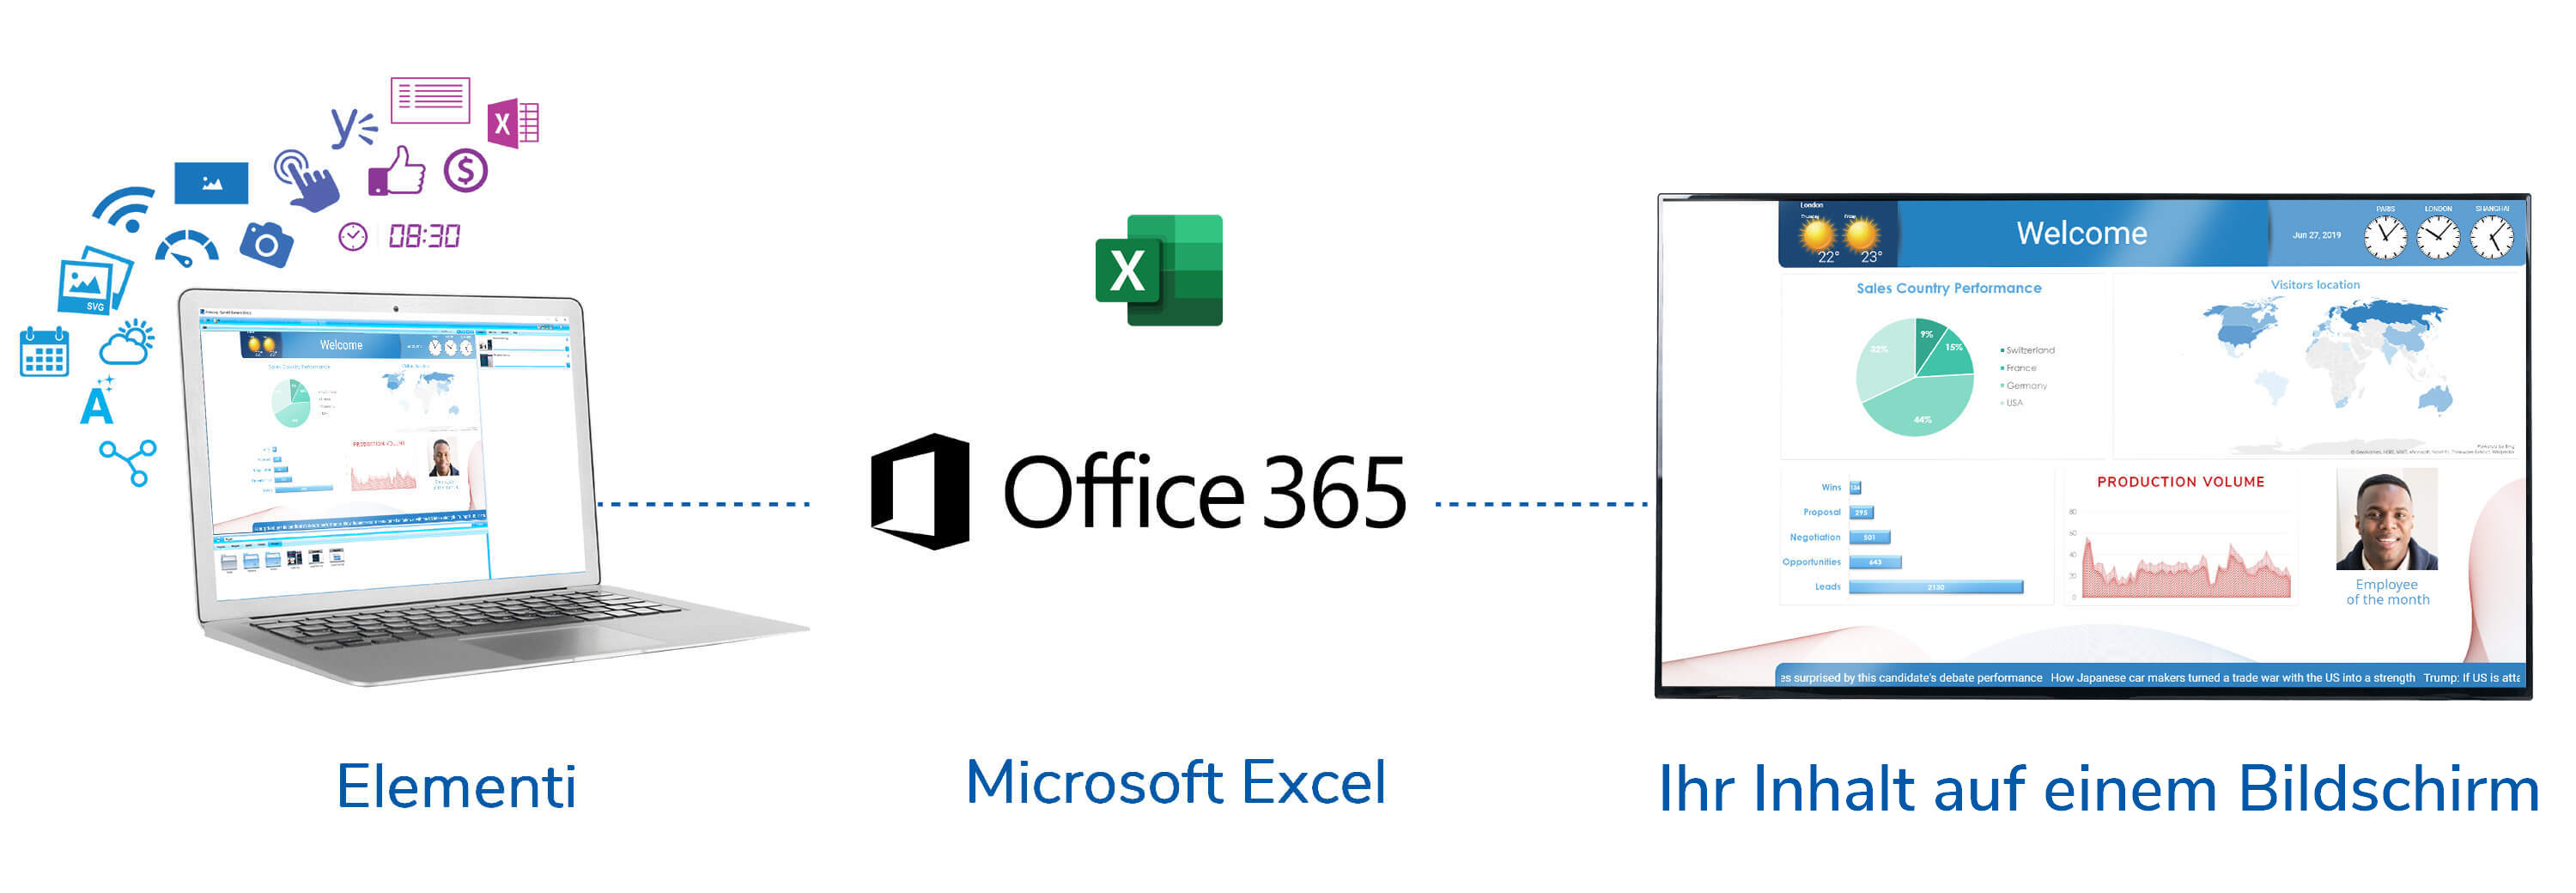 elementi digital signage software integration with microsoft office excel online